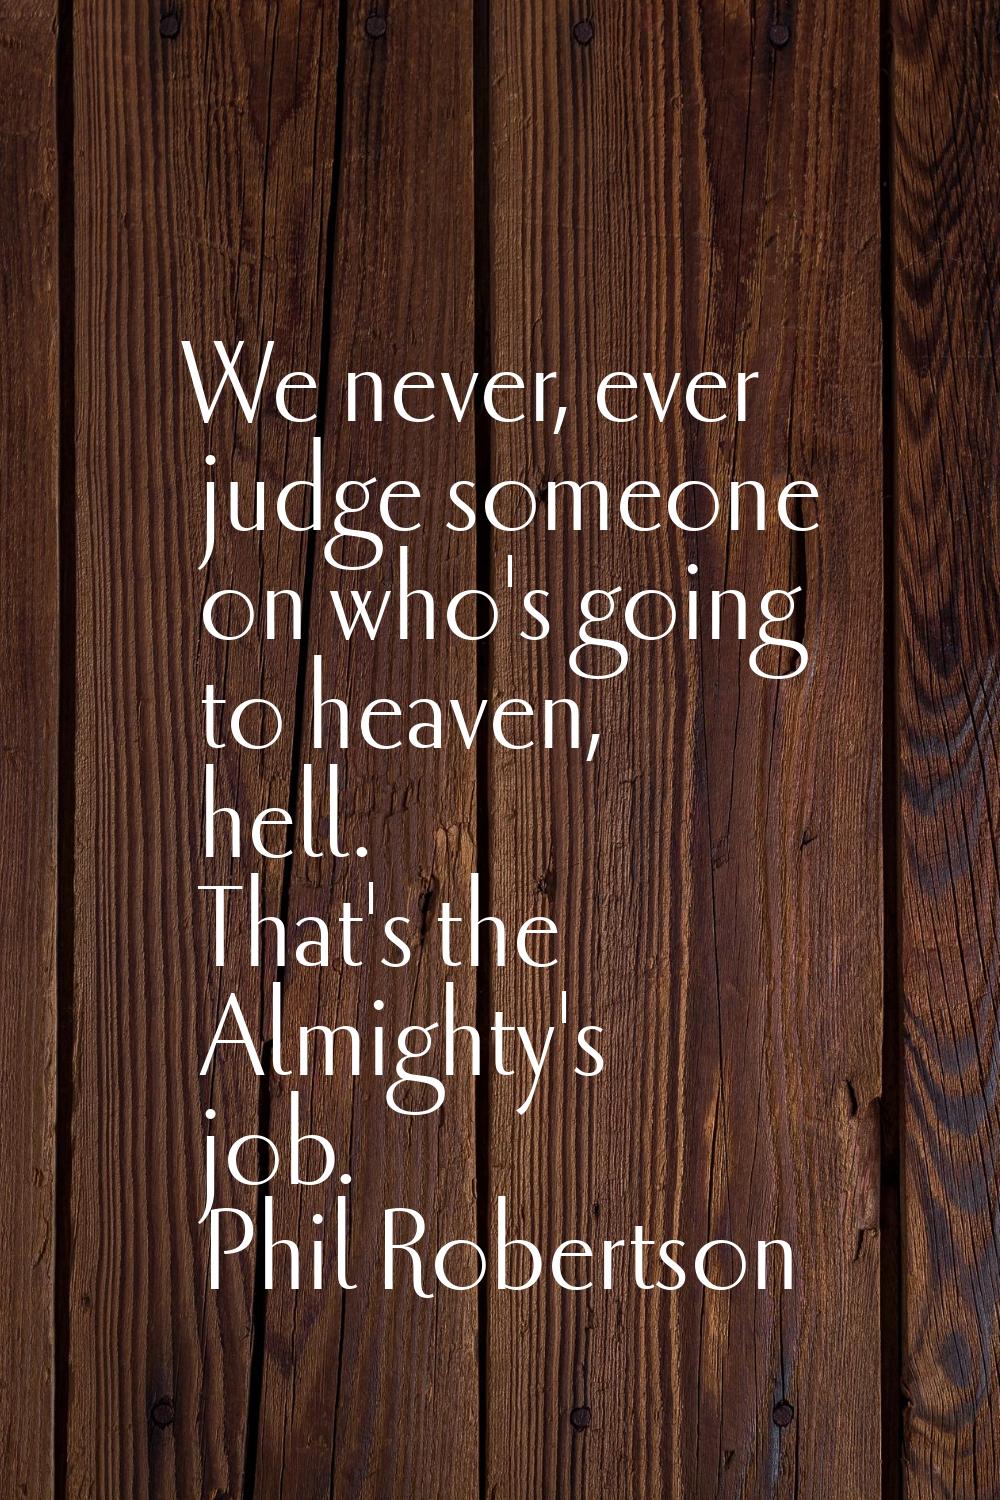 We never, ever judge someone on who's going to heaven, hell. That's the Almighty's job.